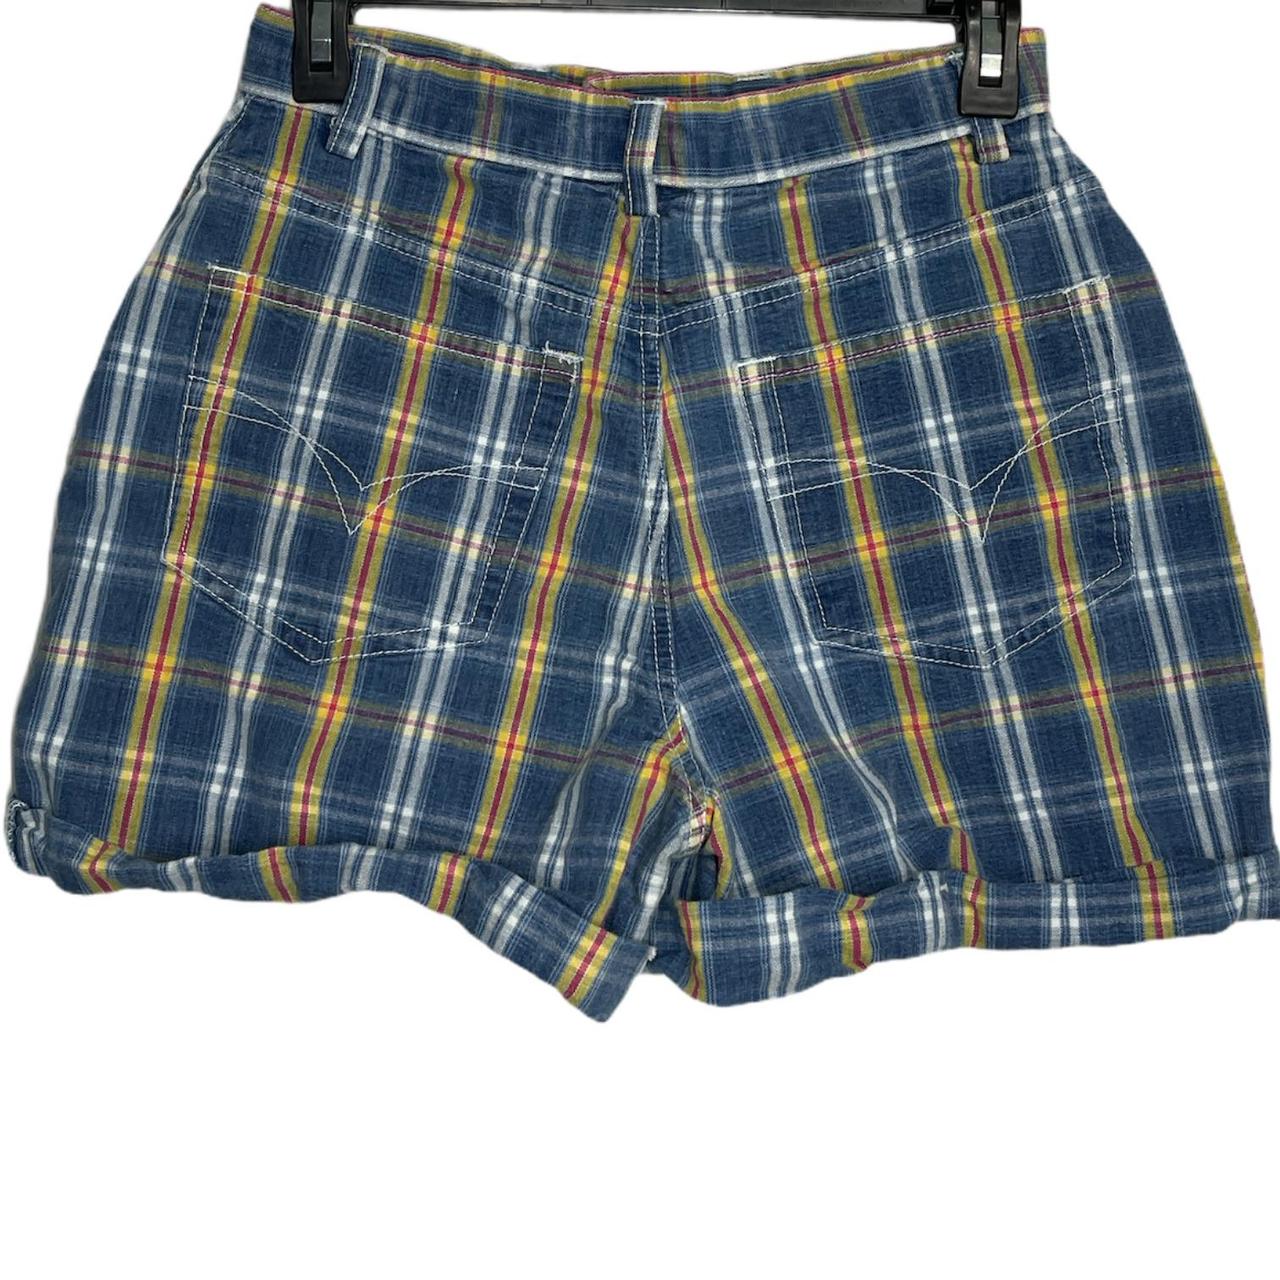 Product Image 2 - Faded Glory Women Checkered Shorts